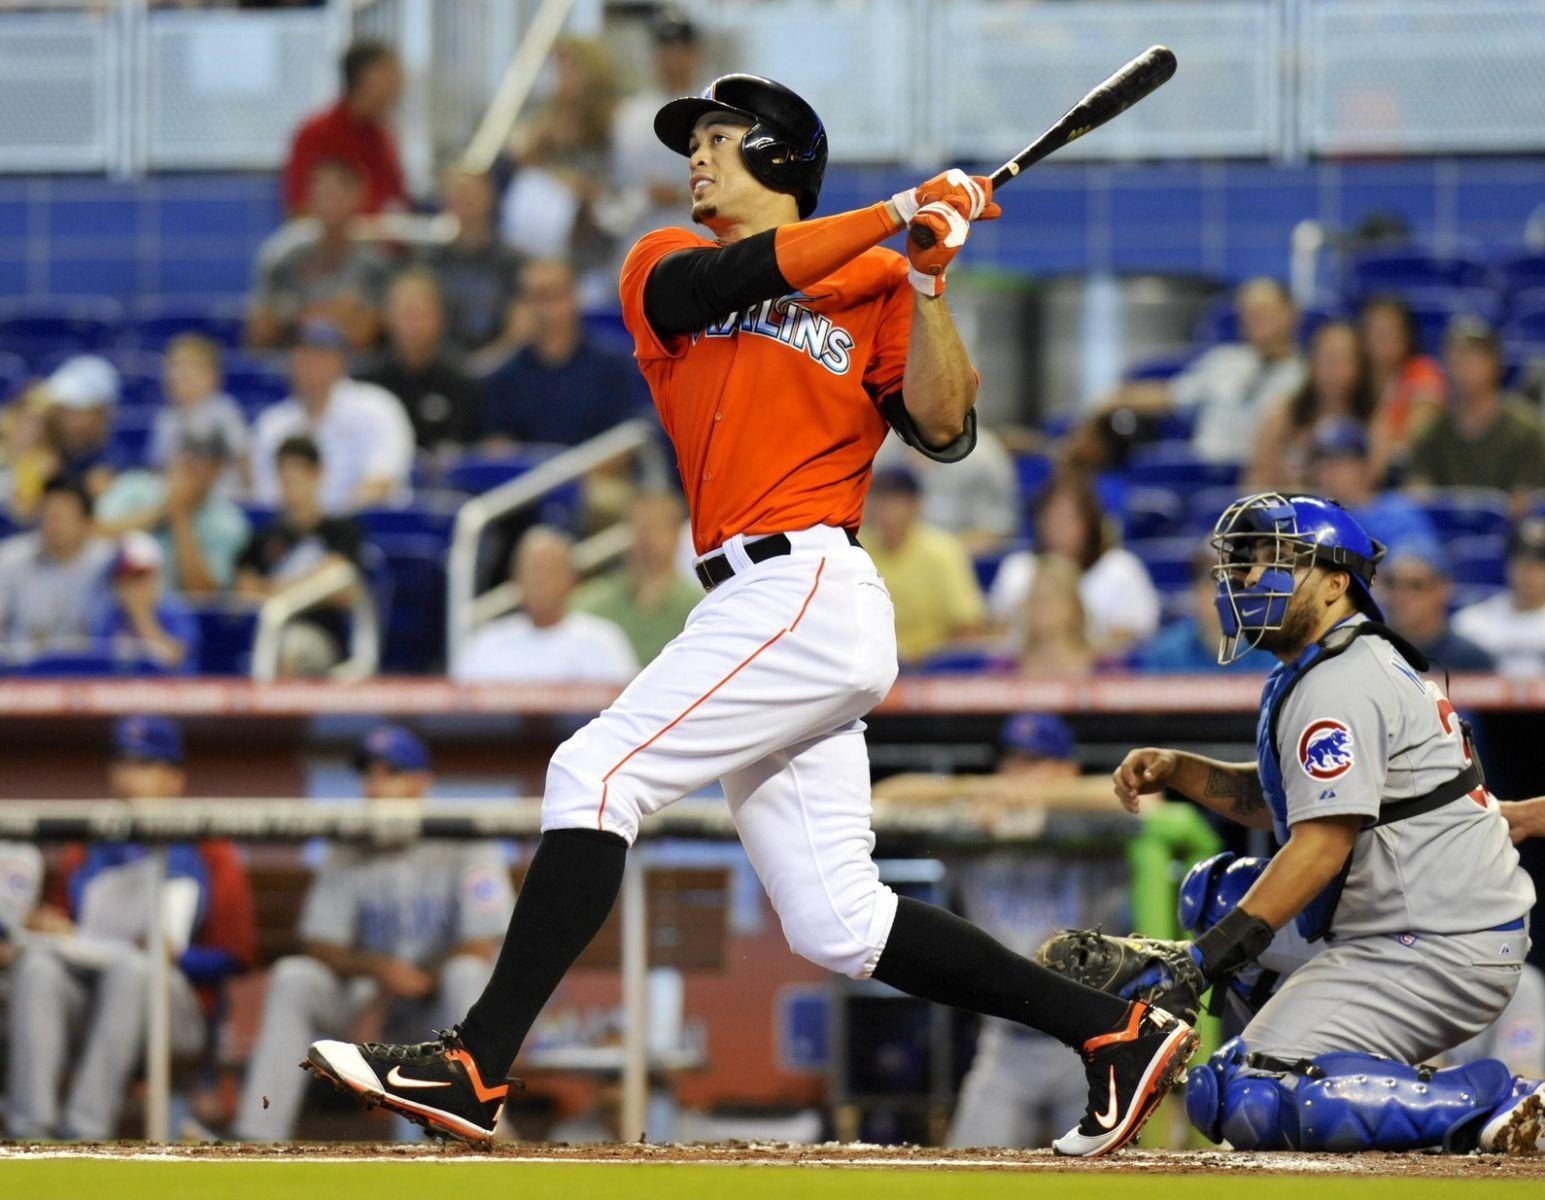 Giancarlo Stanton activated from DL